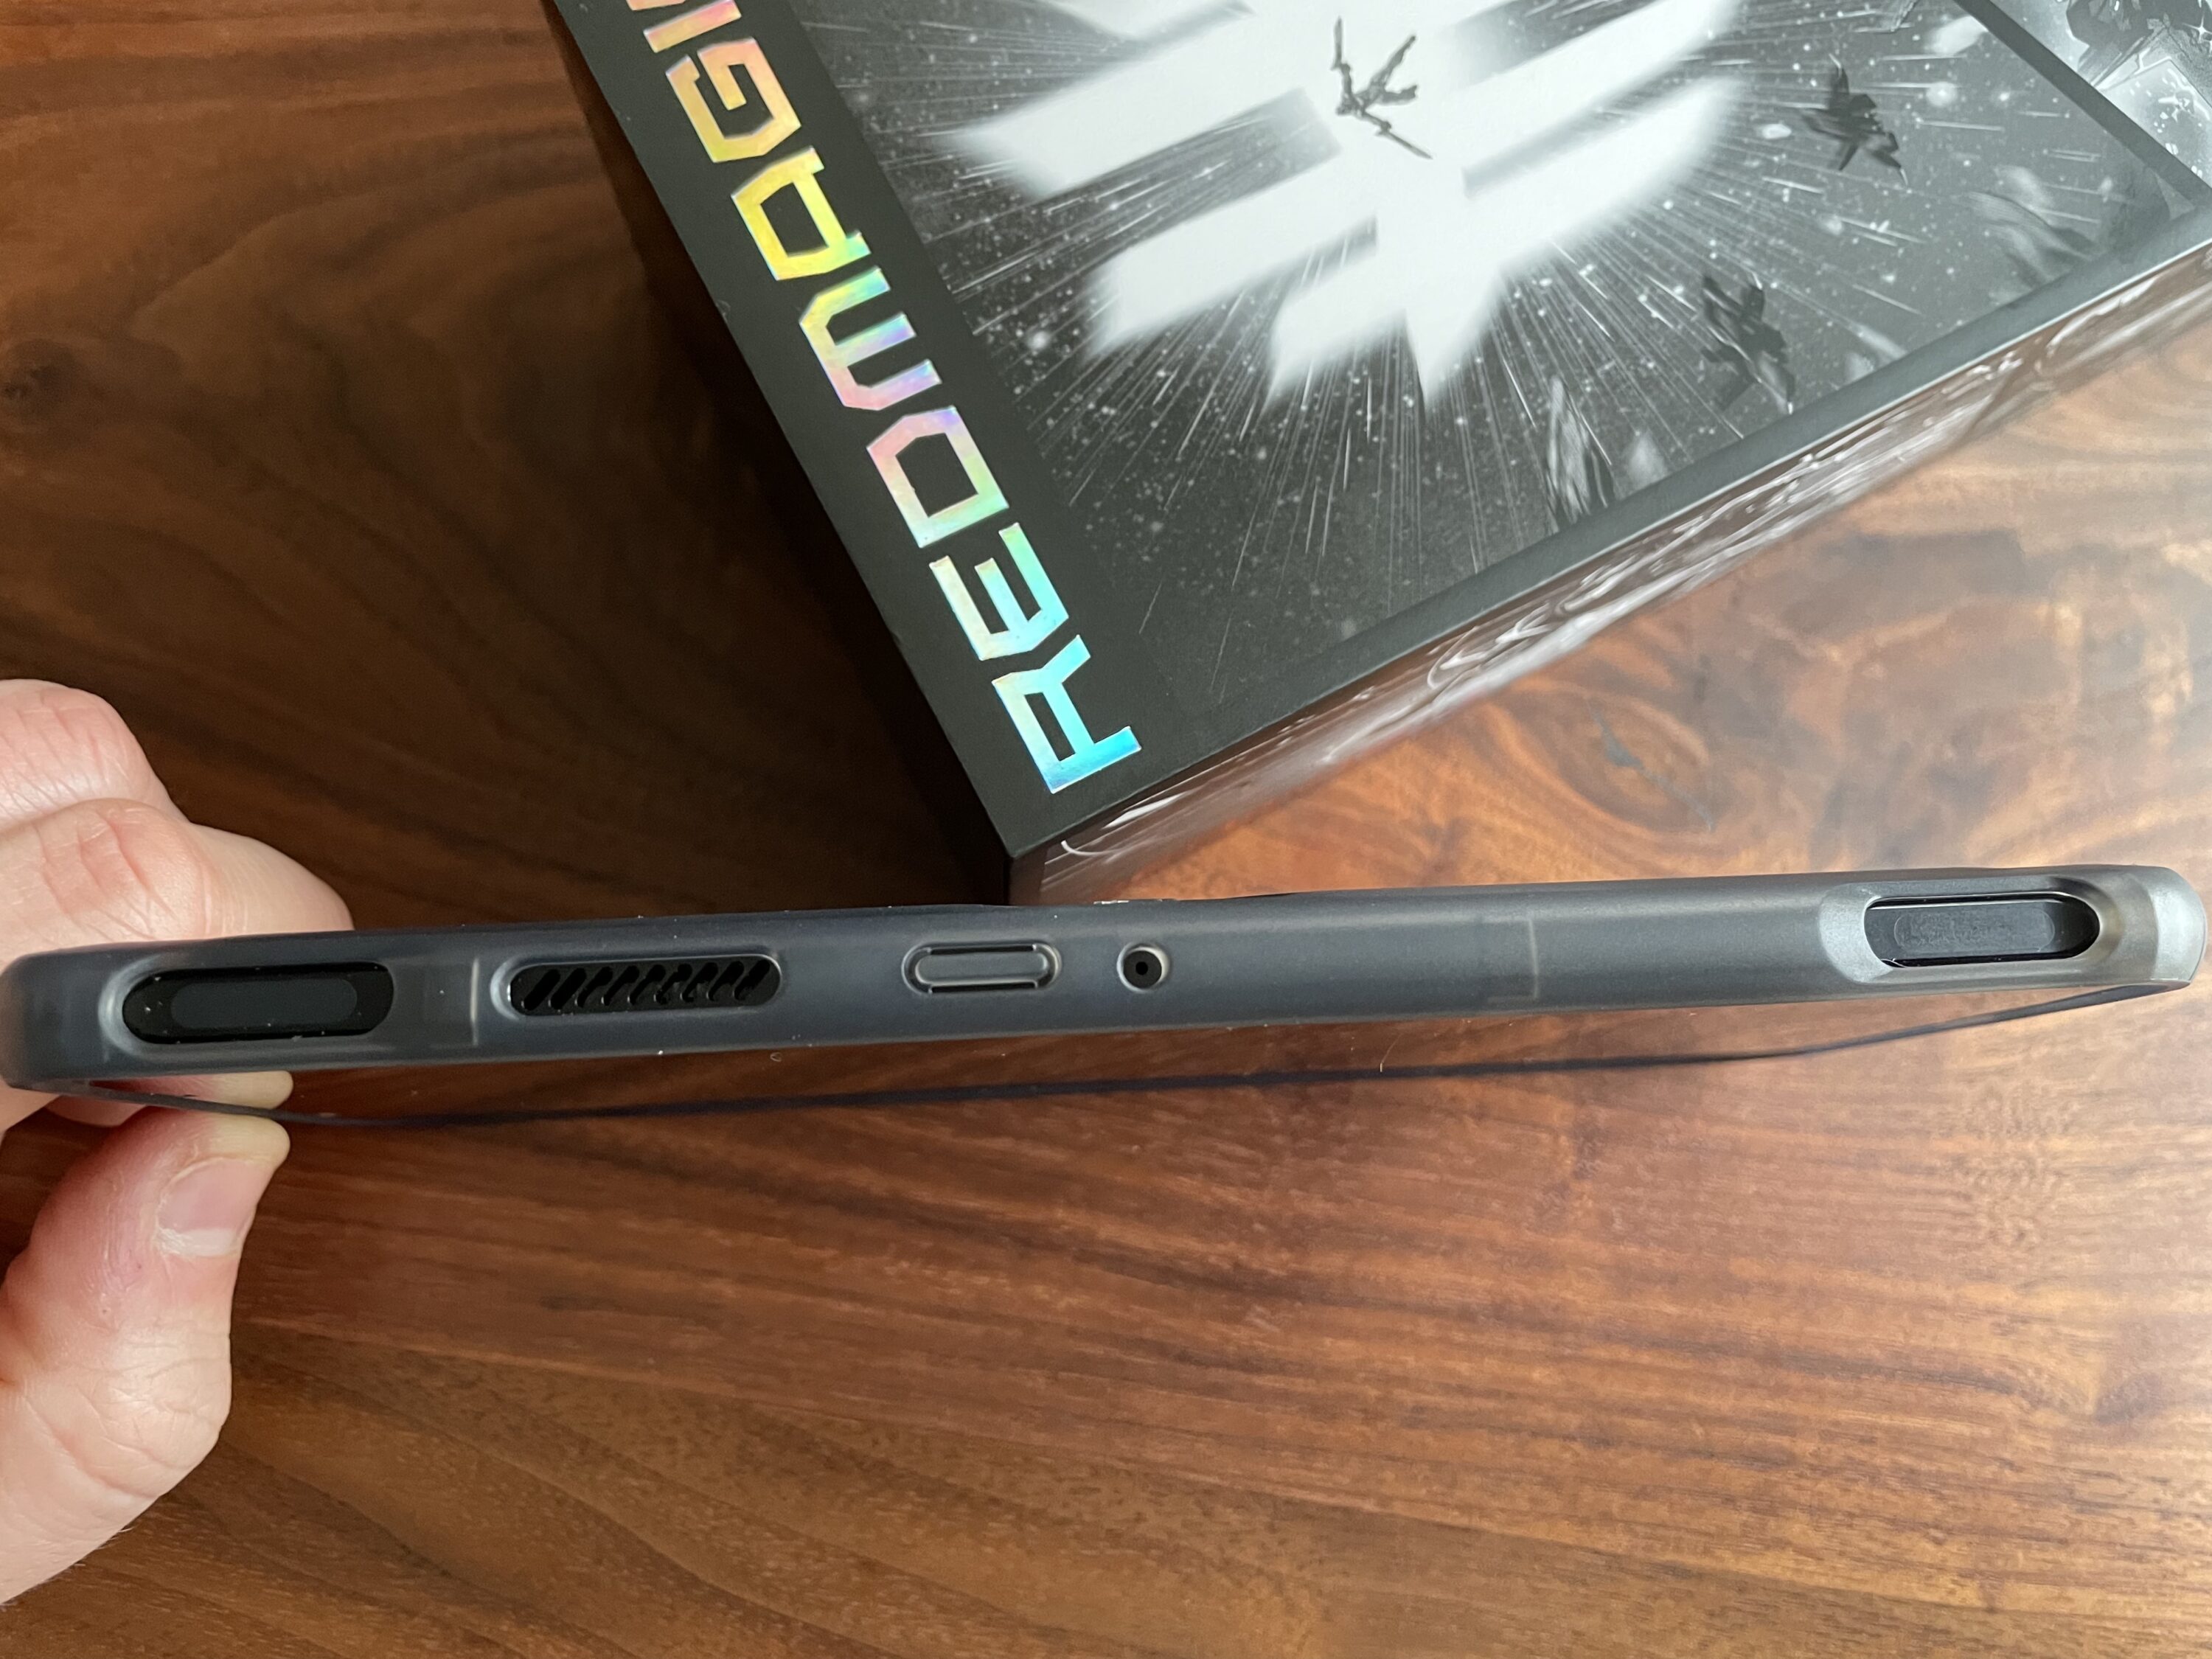 Nubia Redmagic 7 review: The gaming revolution in smartphone guise?